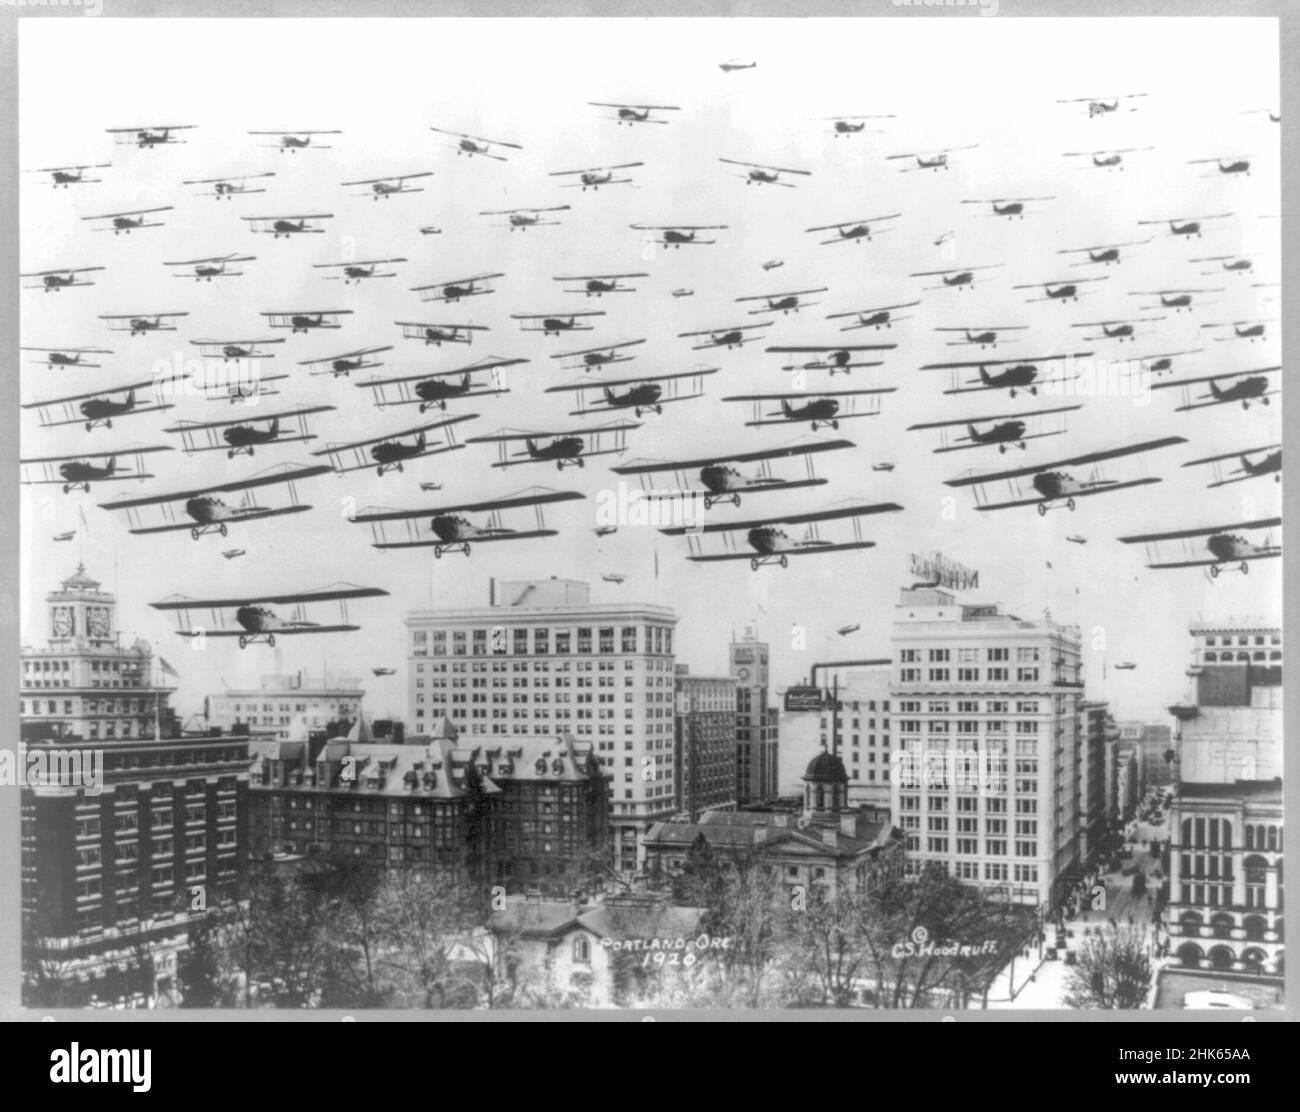 Charles S. 'Woody' Woodruff was an Oregon photographer of the early 20th century - Biplanes Over Portland, 1920 Stock Photo